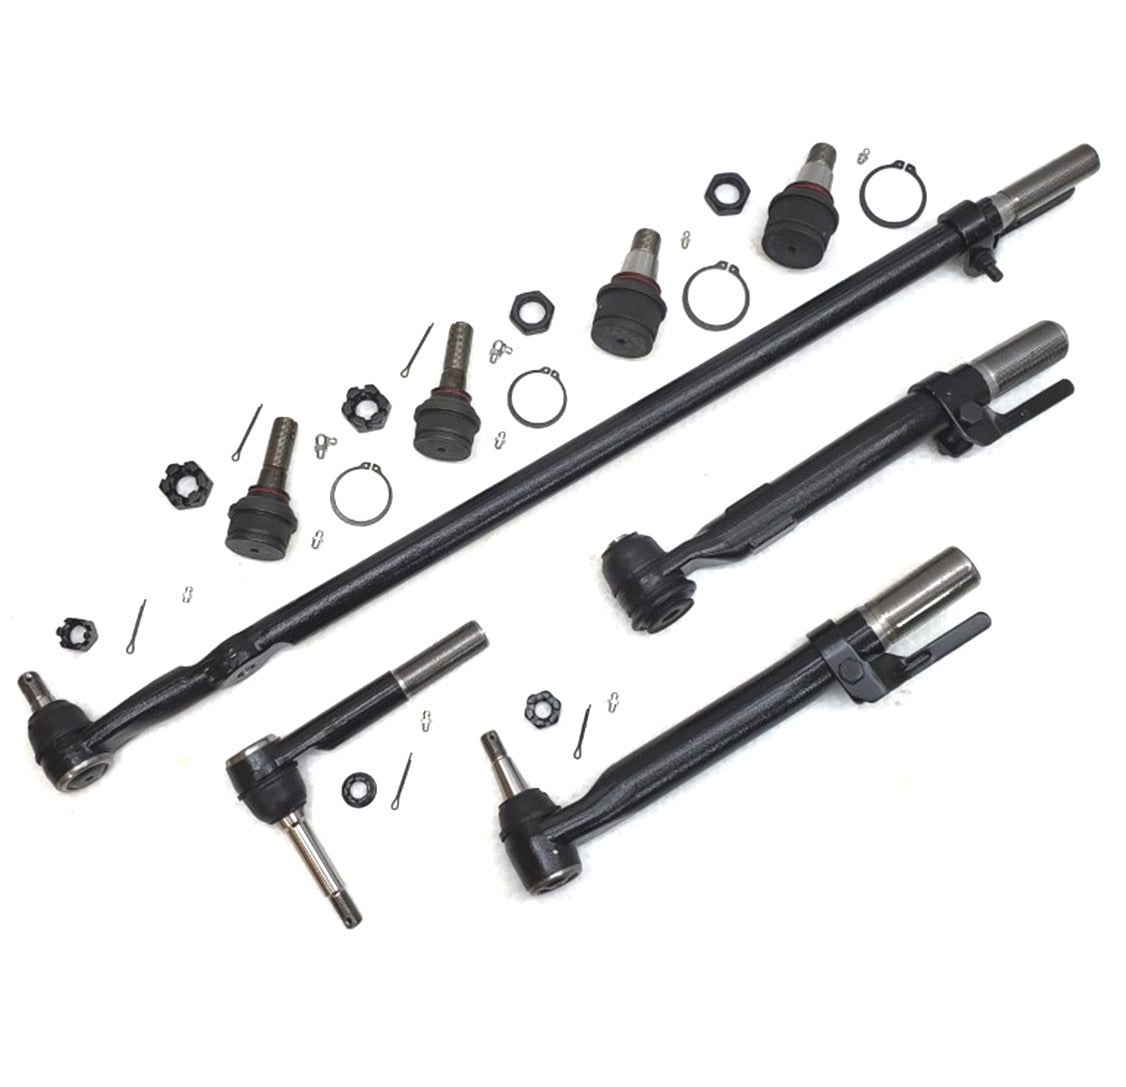 HD Ball Joint Drag Link Tie Rod Steering Kit for 2008-2010 Ford F250, F350 Super Duty 4x4